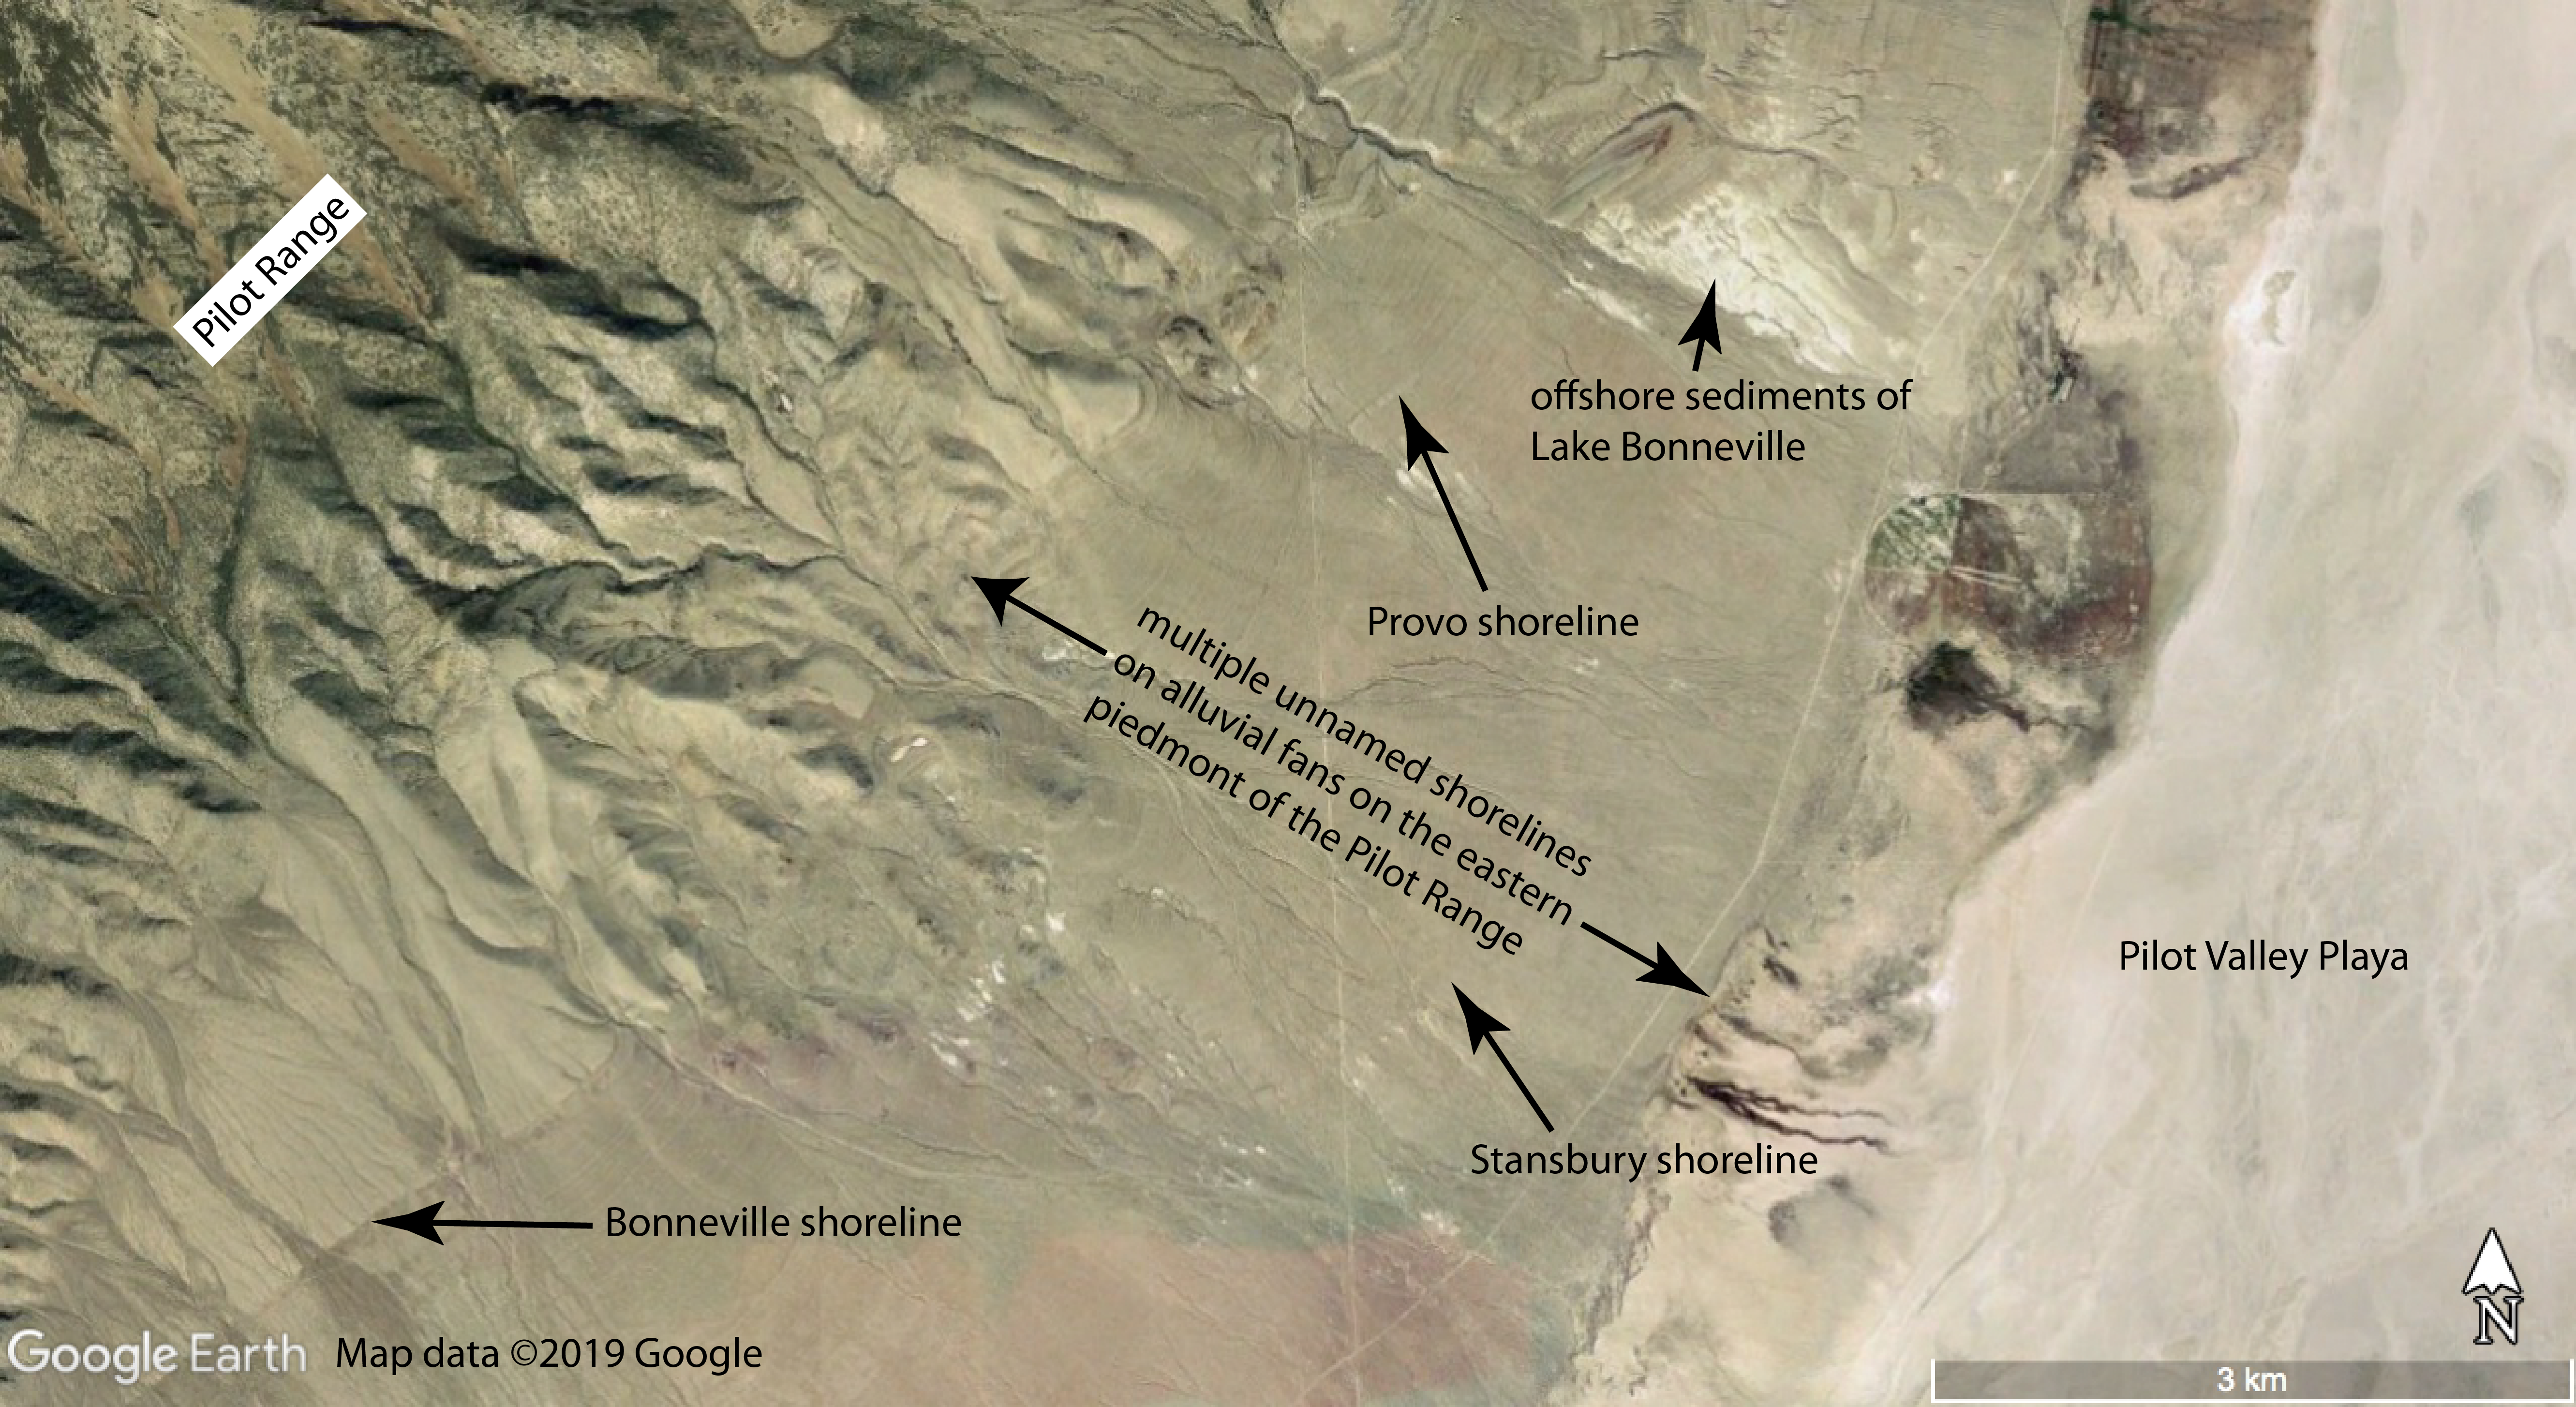 Satellite view of tan desert landscape with slopes on the left leading down to a flat white playa labeled Pilot Valley Playa on the right; the slopes are labeled Pilot Range; near the bottom of the image at the base of the slopes is the label Bonneville shoreline; near the top of the image at the base of the slopes are the labels offshore sediments of Lake Bonneville and Provo shoreline; leading from the base of the slopes to the playa is the label multiple unnamed shorelines on alluvial fans on the eastern piedmont of the Pilot Range with another label Stansbury shoreline.